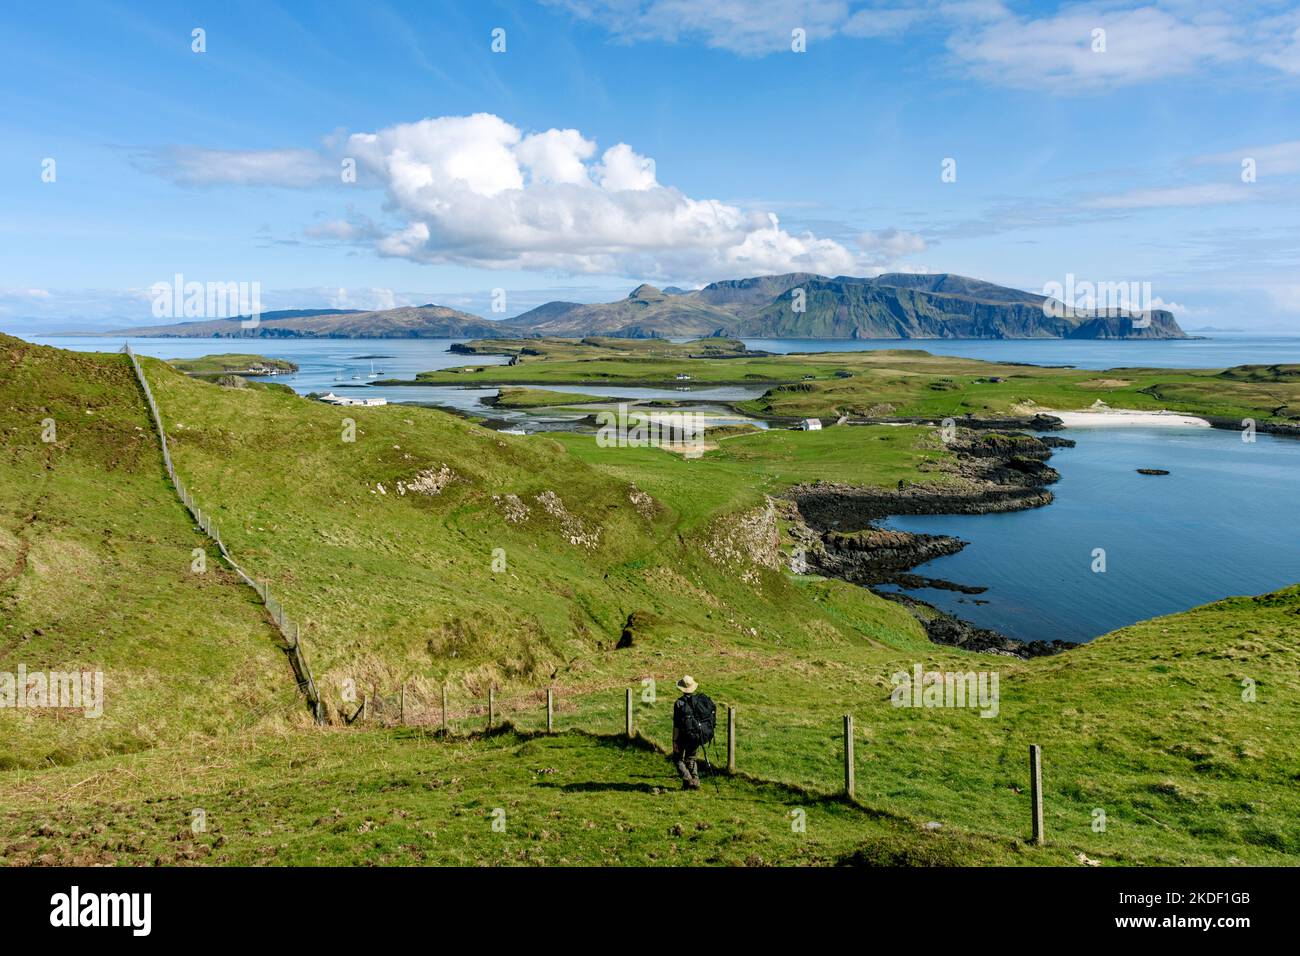 The Isle of Rum over the Isle of Sanday, from the Isle of Canna, Scotland, UK Stock Photo